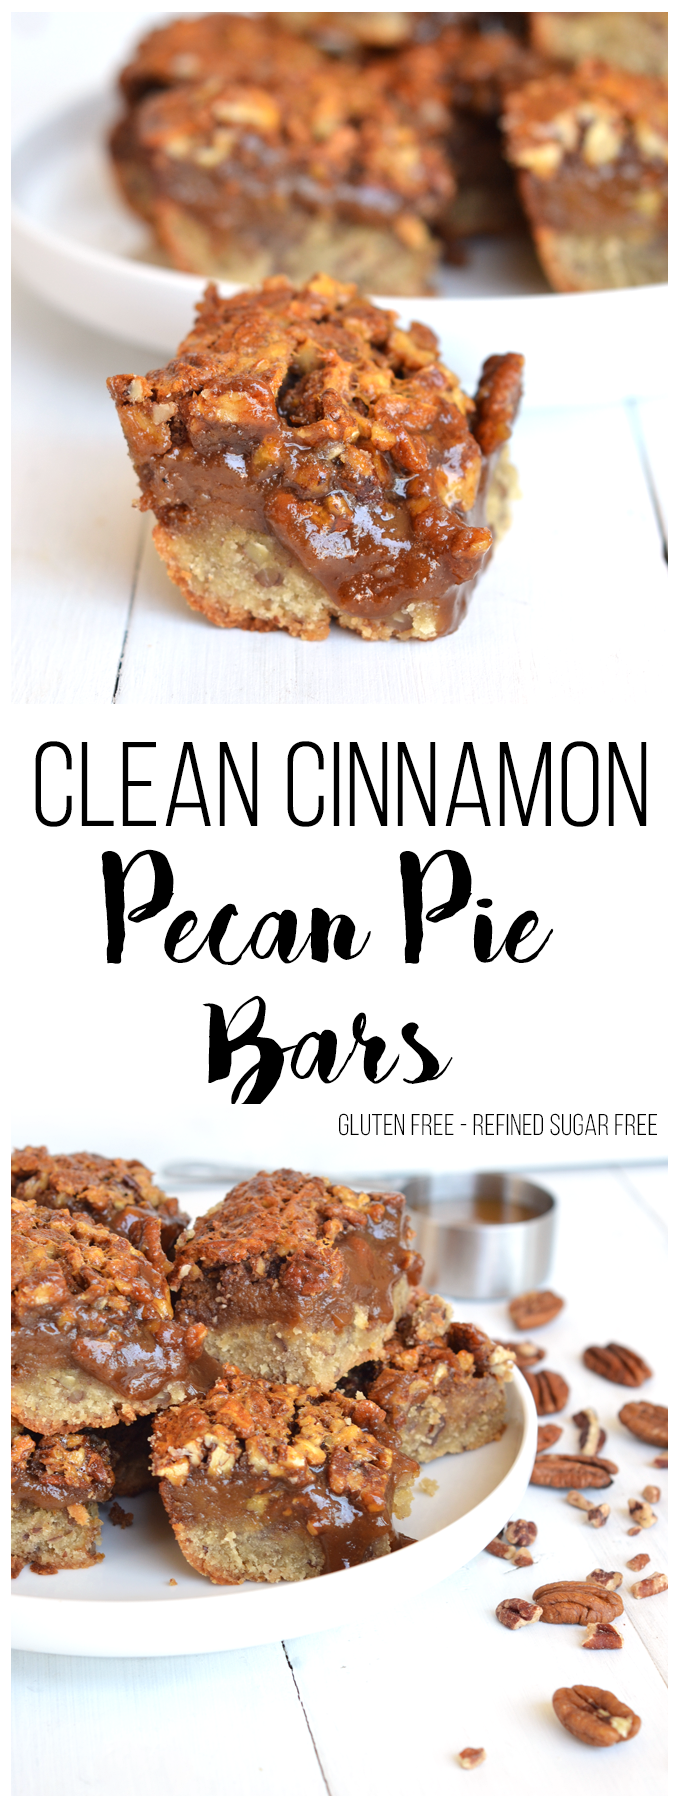 Looking for a healthy dessert for fall? This Clean Cinnamon Pecan Pie Bar recipe is perfect for all your gluten free and refined sugar free needs!